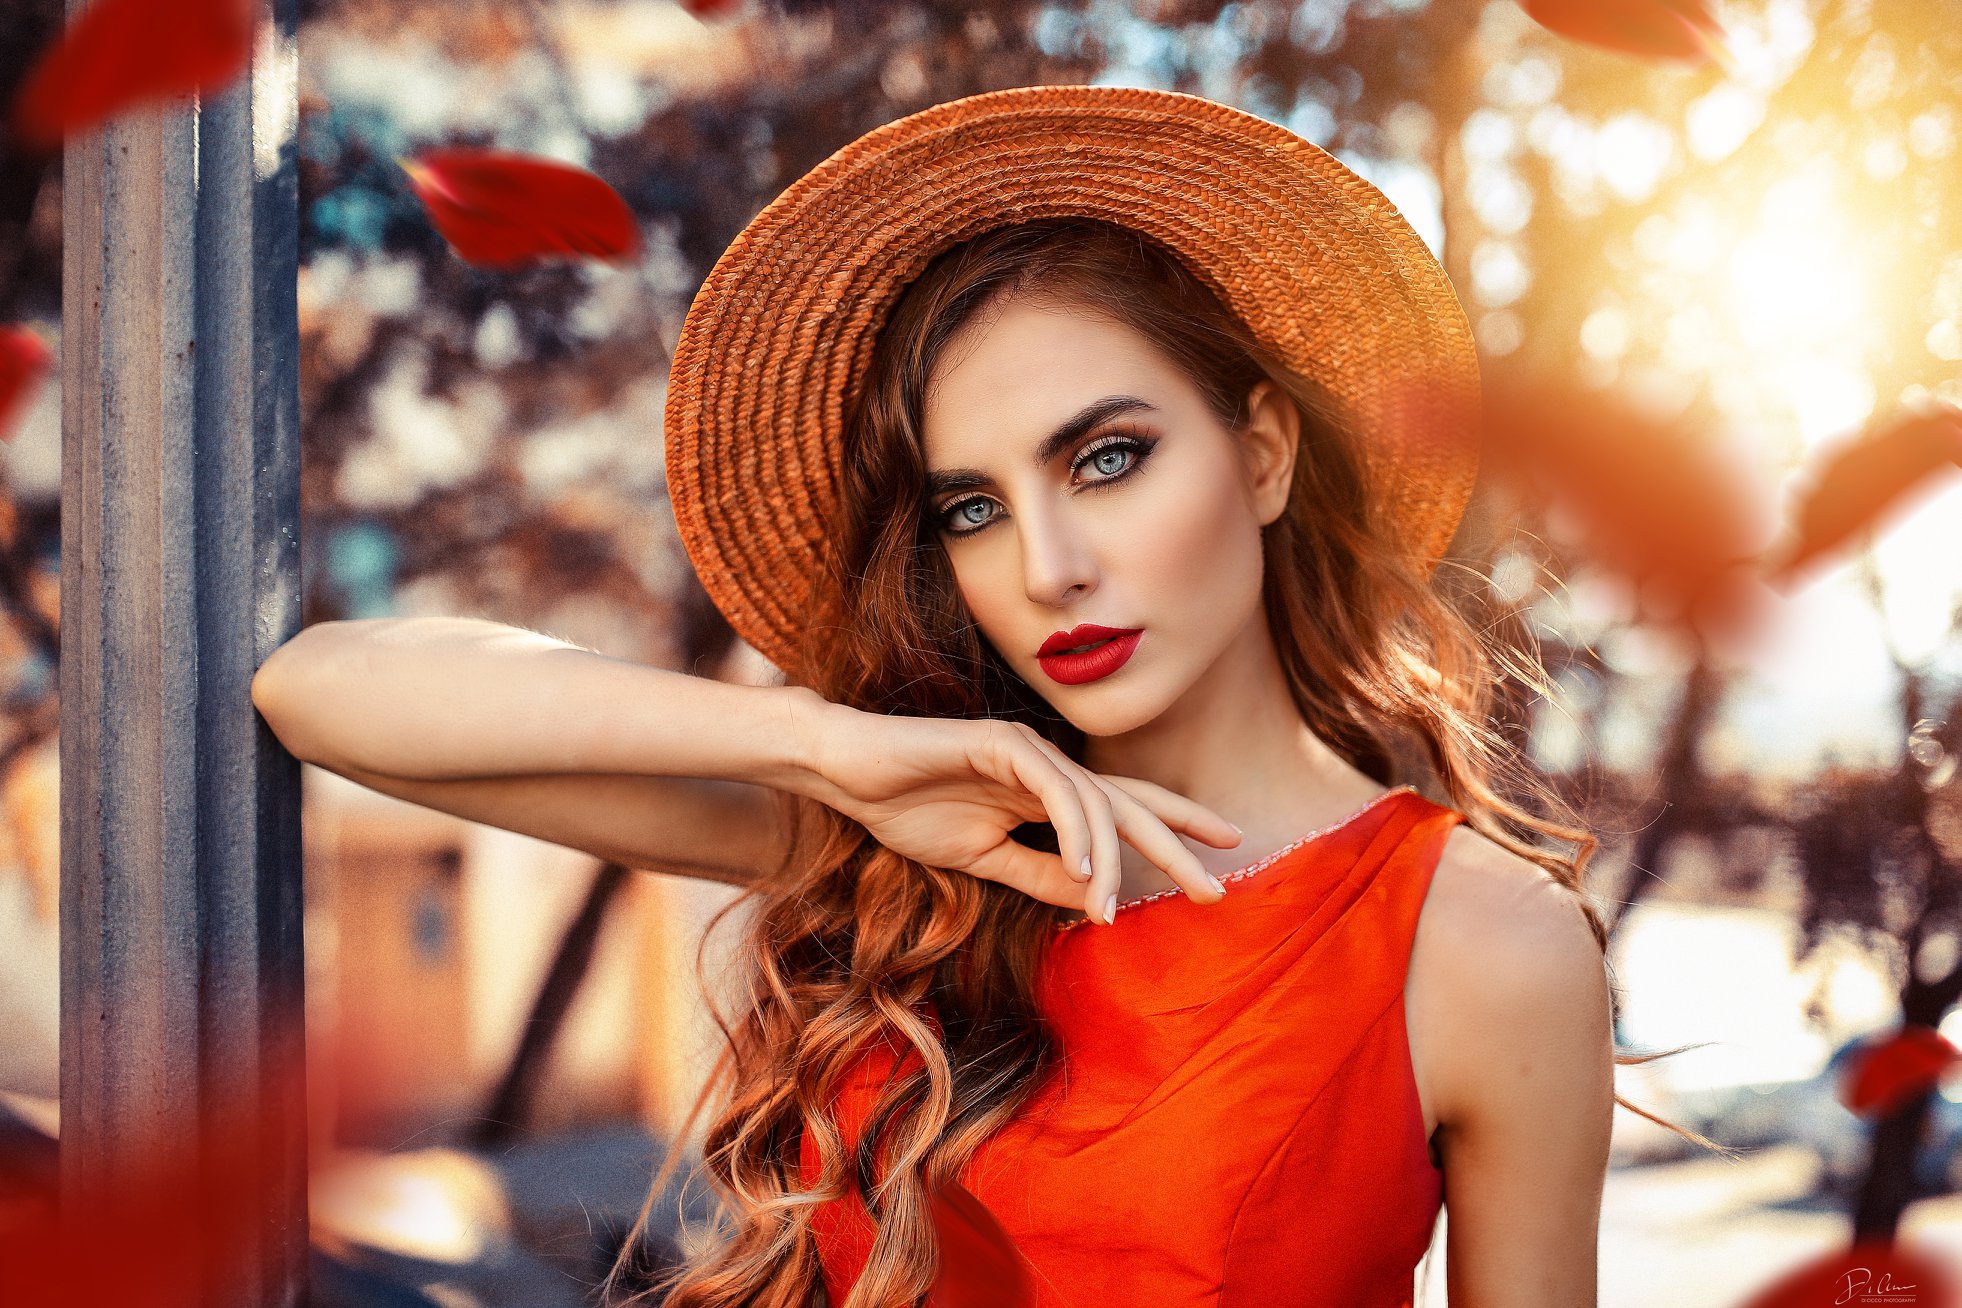 People 1962x1308 makeup face women Alessandro Di Cicco hat long hair model straw hat red dress